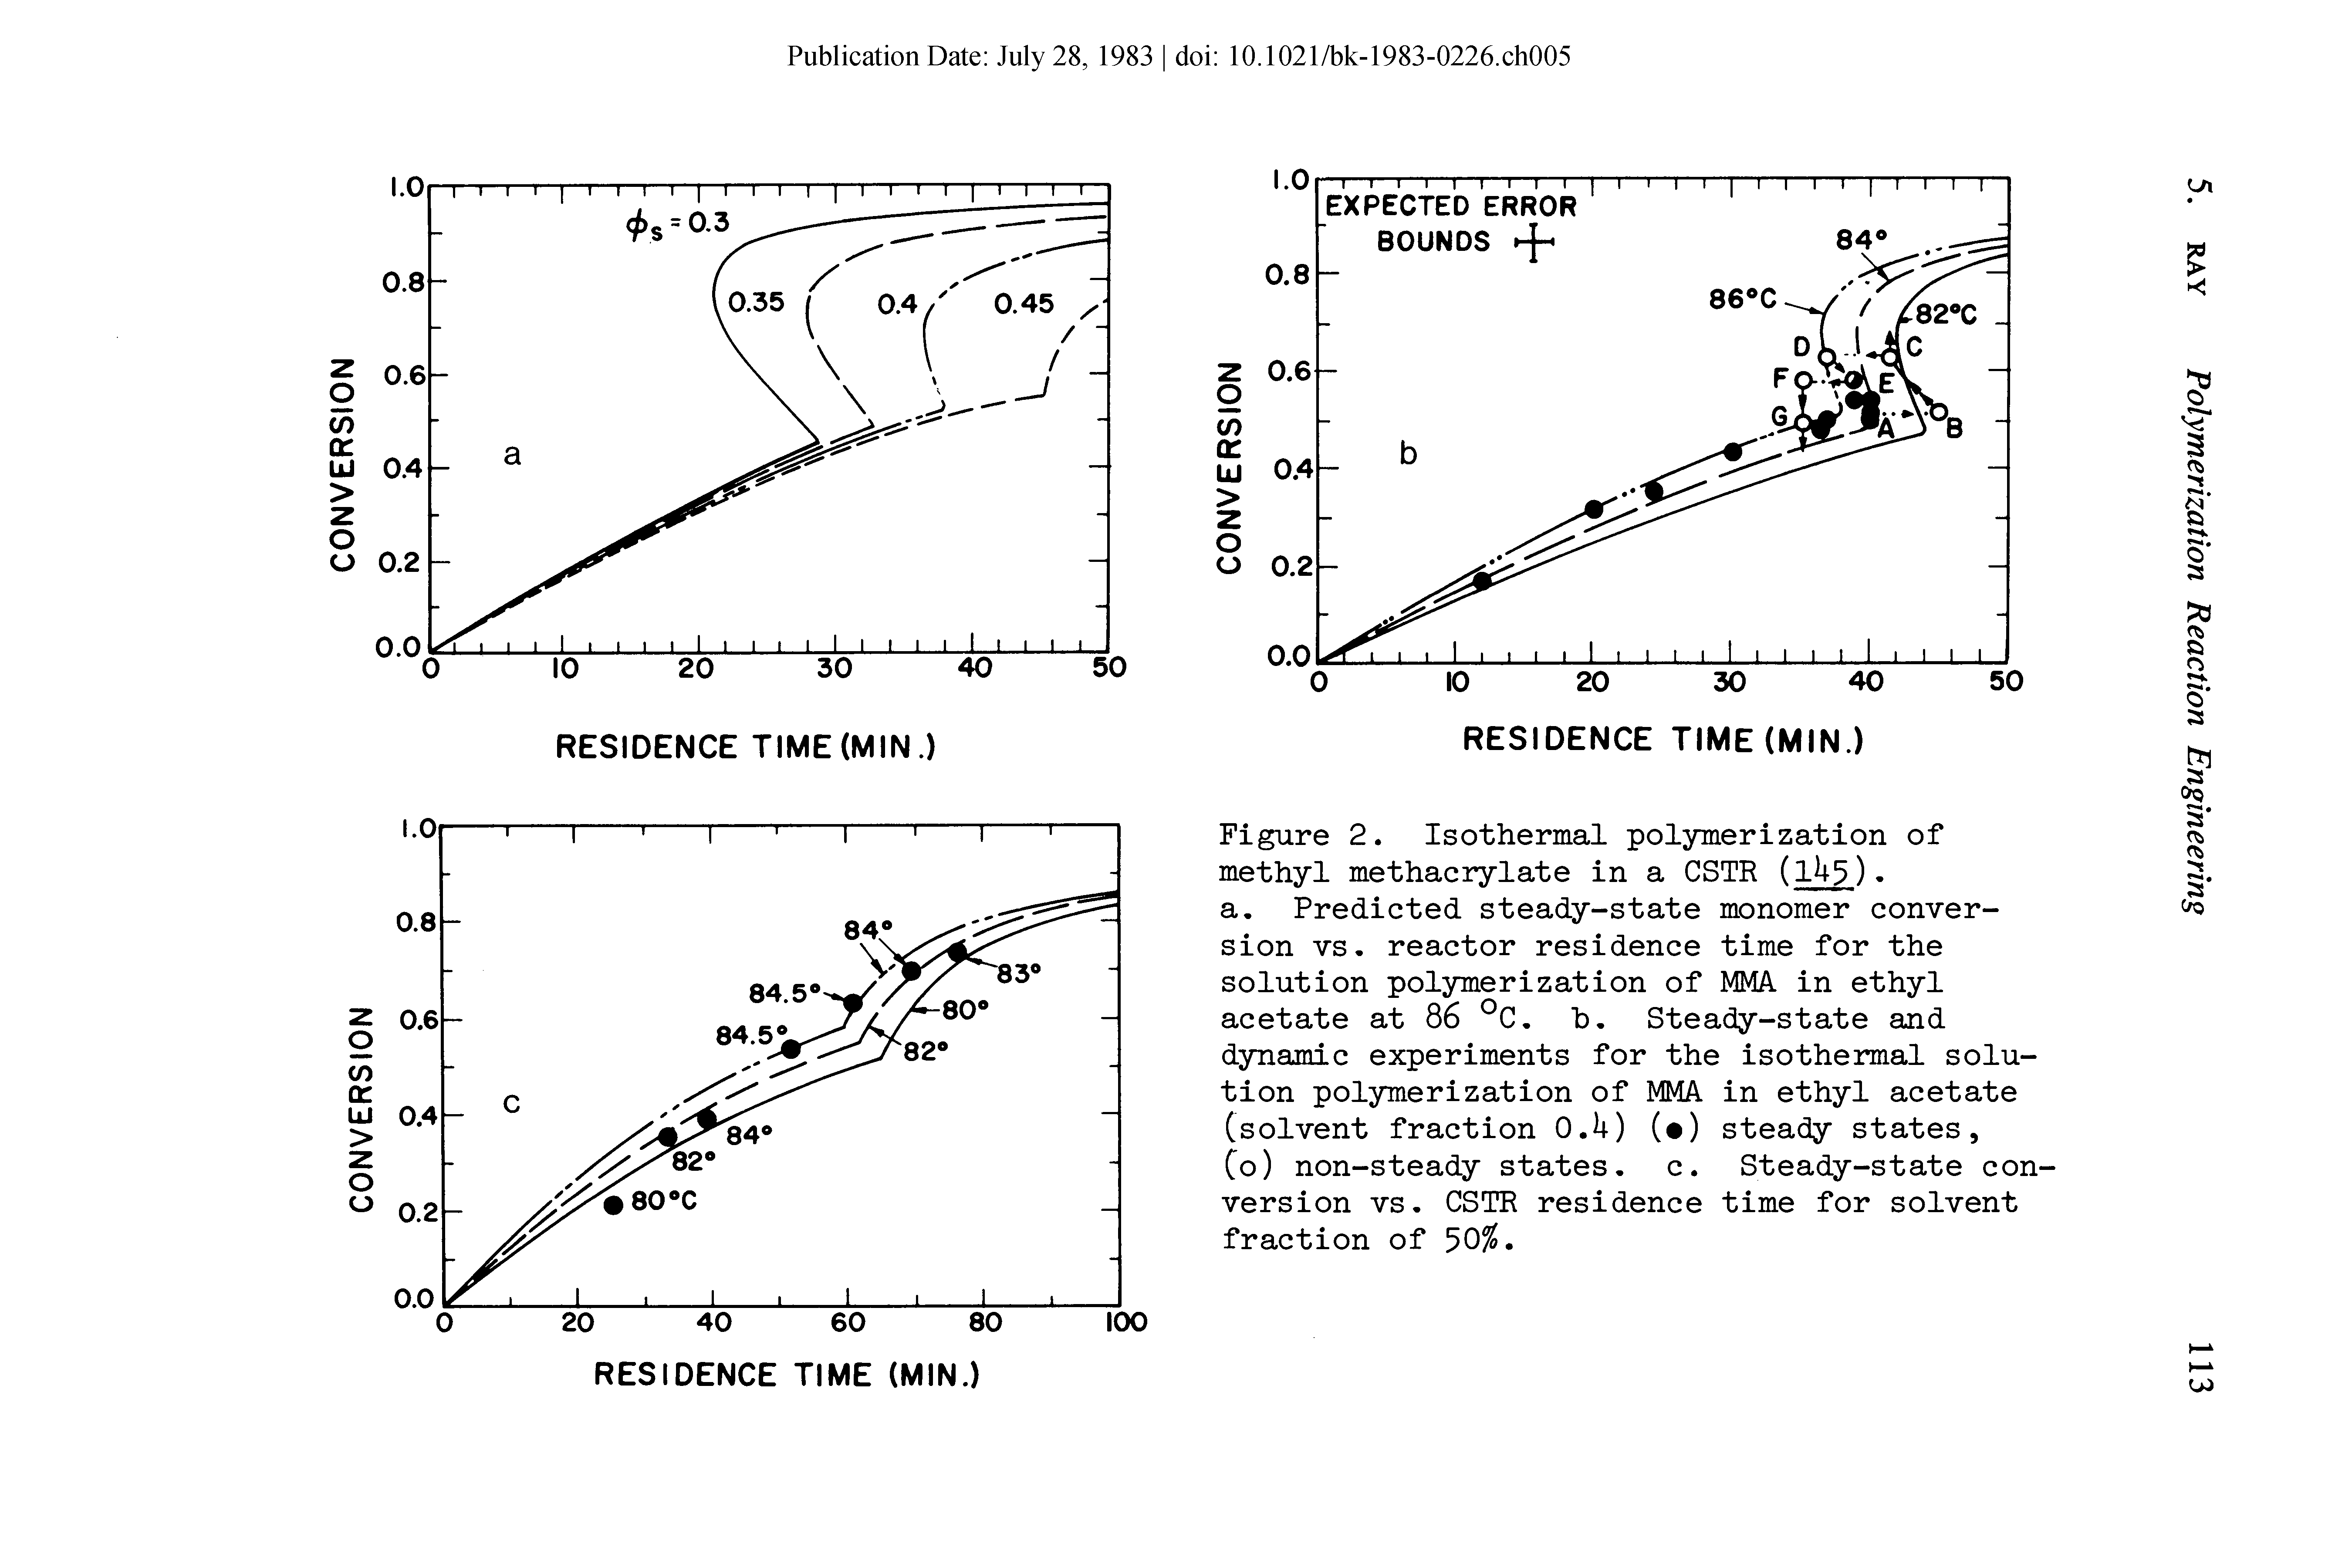 Figure 2. Isothermal polymerization of methyl methacrylate in a CSTR (1 5). a. Predicted steady-state monomer conversion vs. reactor residence time for the solution polymerization of MMA in ethyl acetate at 86 °C. h. Steady-state and dynamic experiments for the isothermal solution polymerization of MMA in ethyl acetate (solvent fraction O.k) ( ) steady states,...